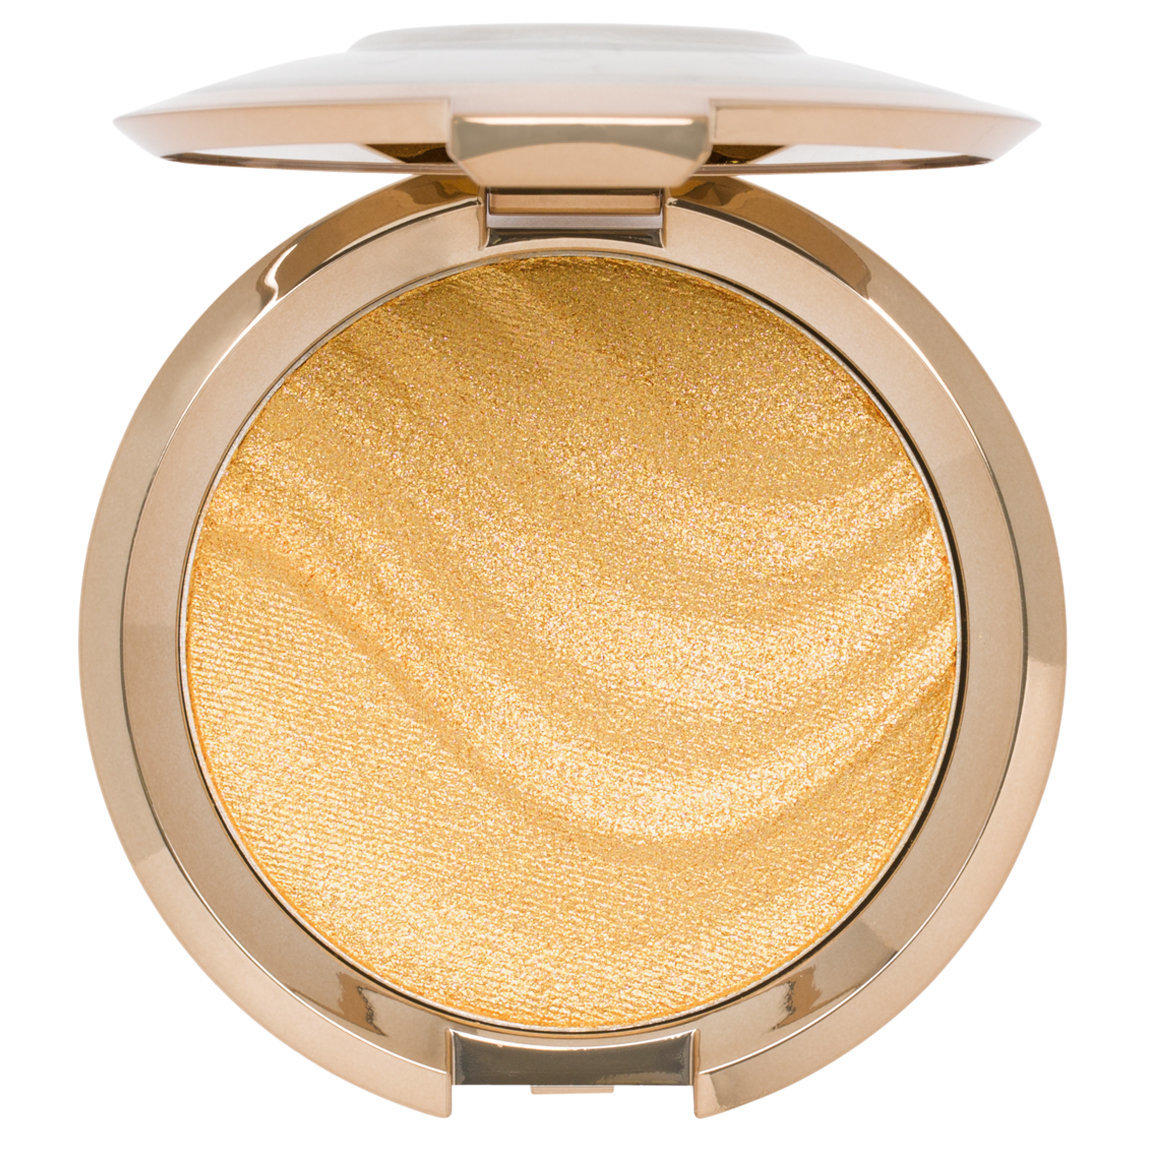 BECCA Shimmering Skin Perfector Pressed Gold Lava